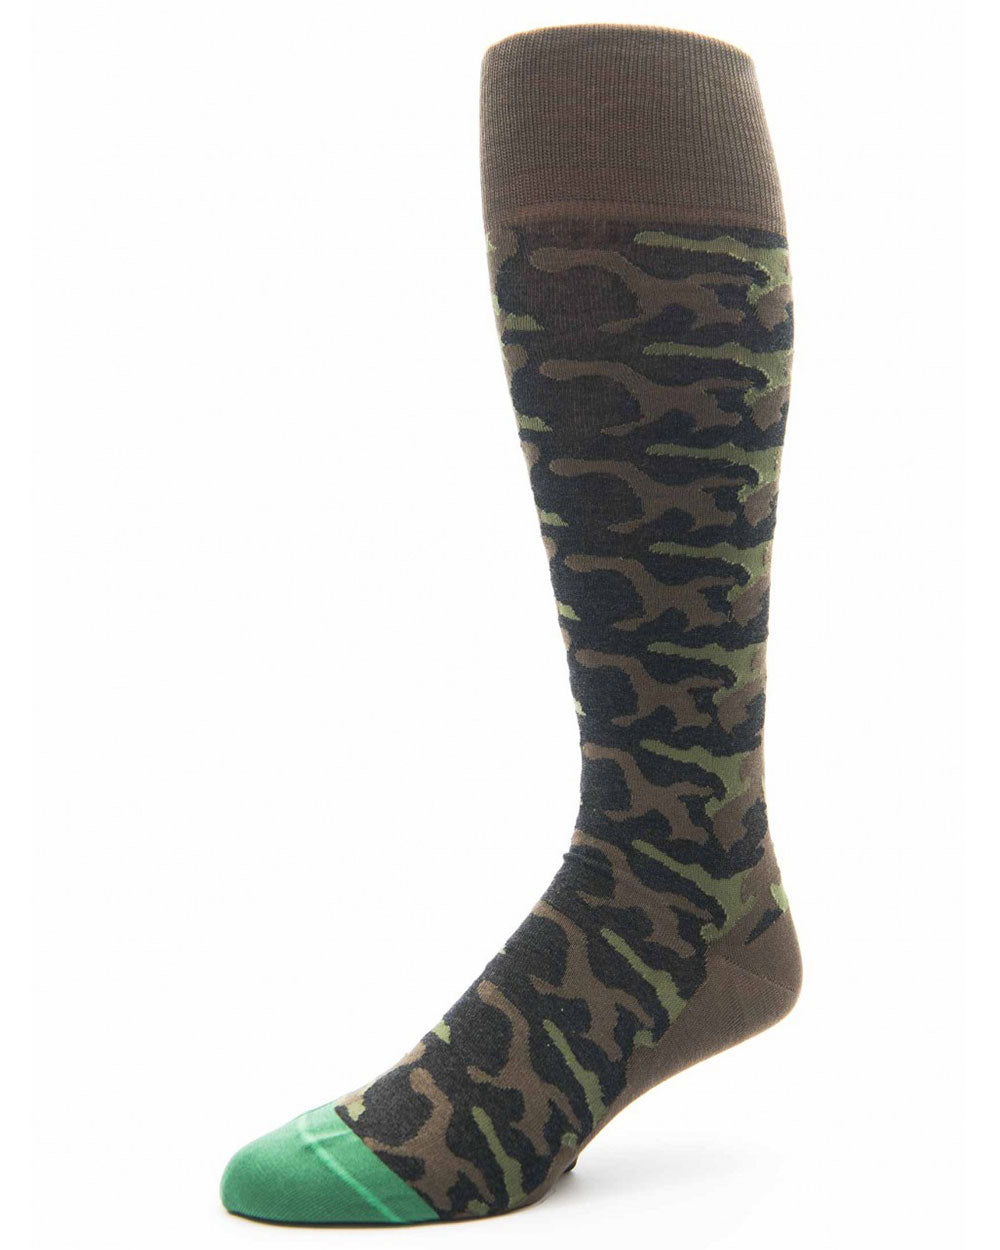 Olive and Emerald Green Camo Over the Calf Socks